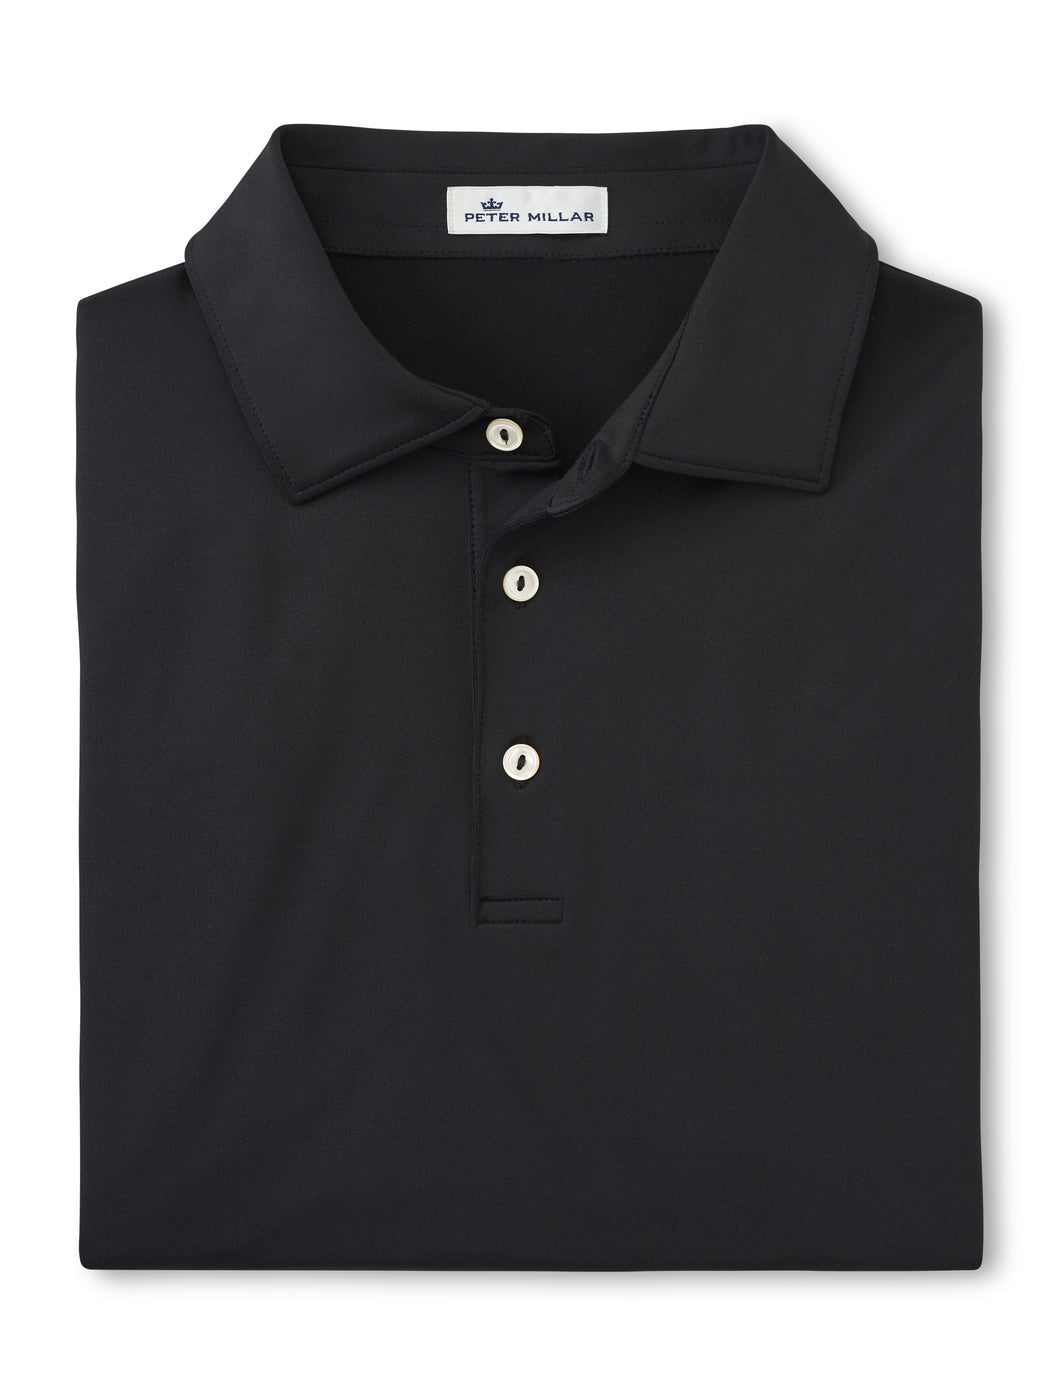 Peter Millar Solid Performance Jersey Polo in Black